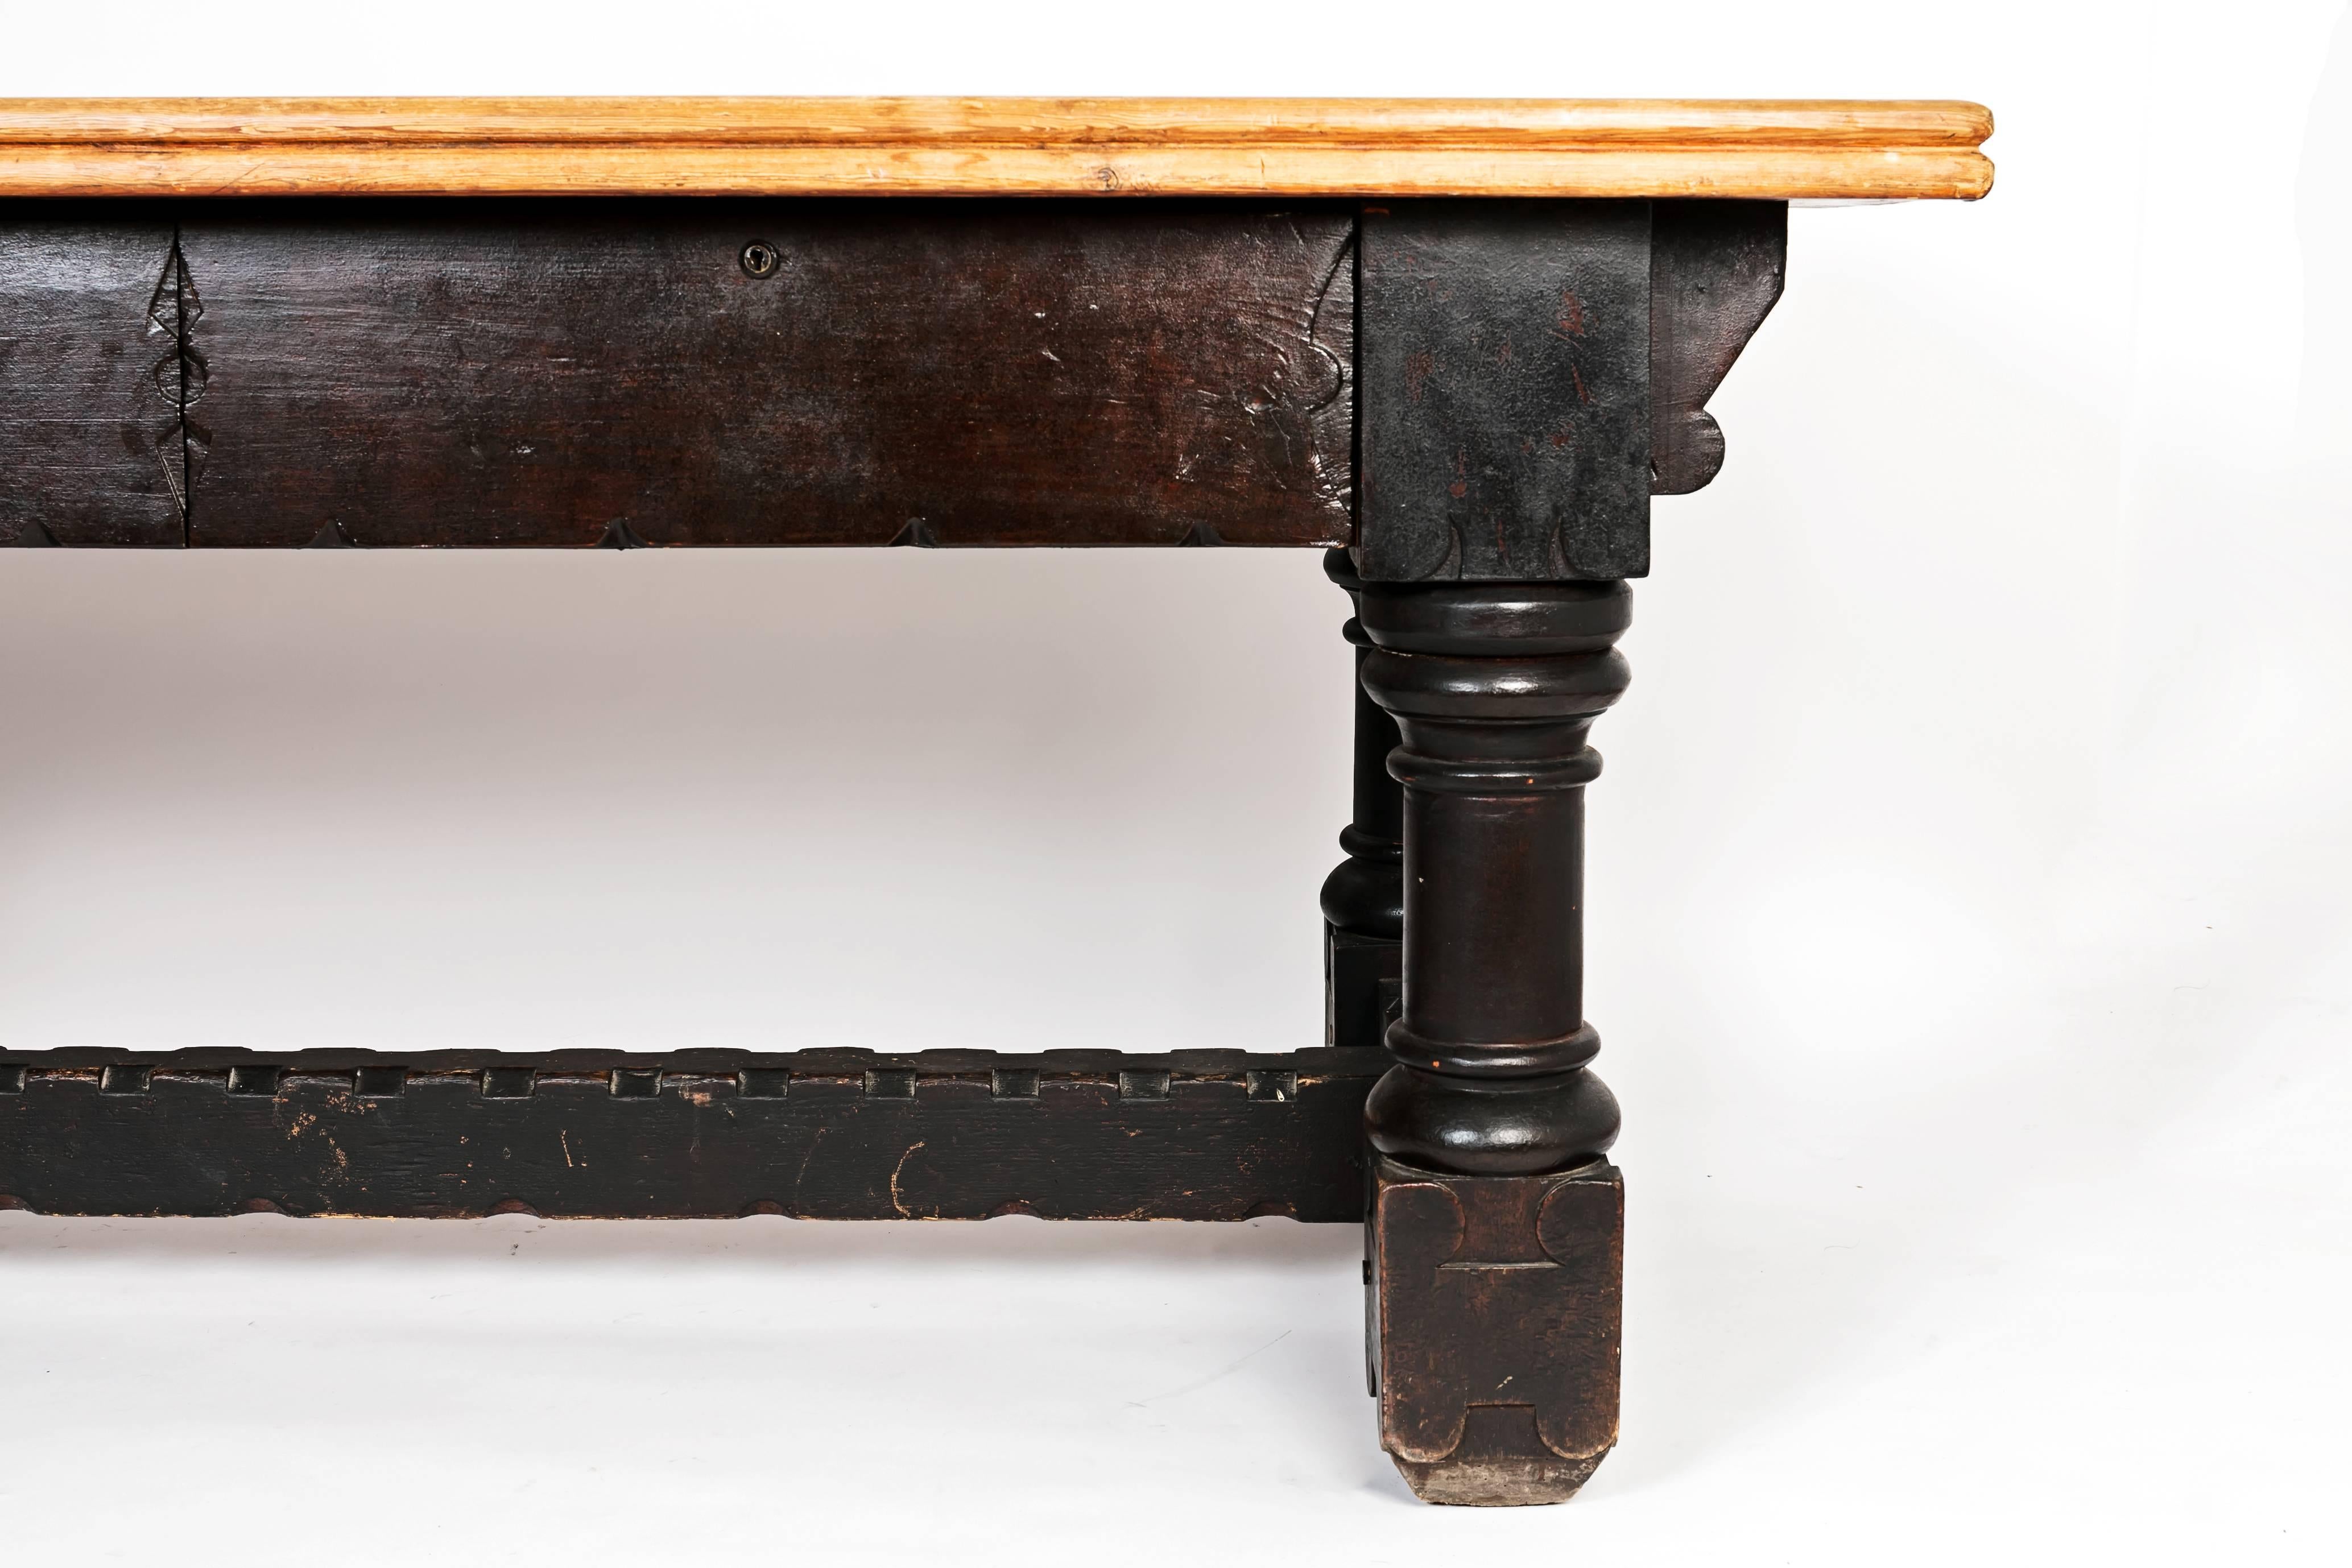 19th century English country wooden table in black with plain wood top. Has two drawers.
 